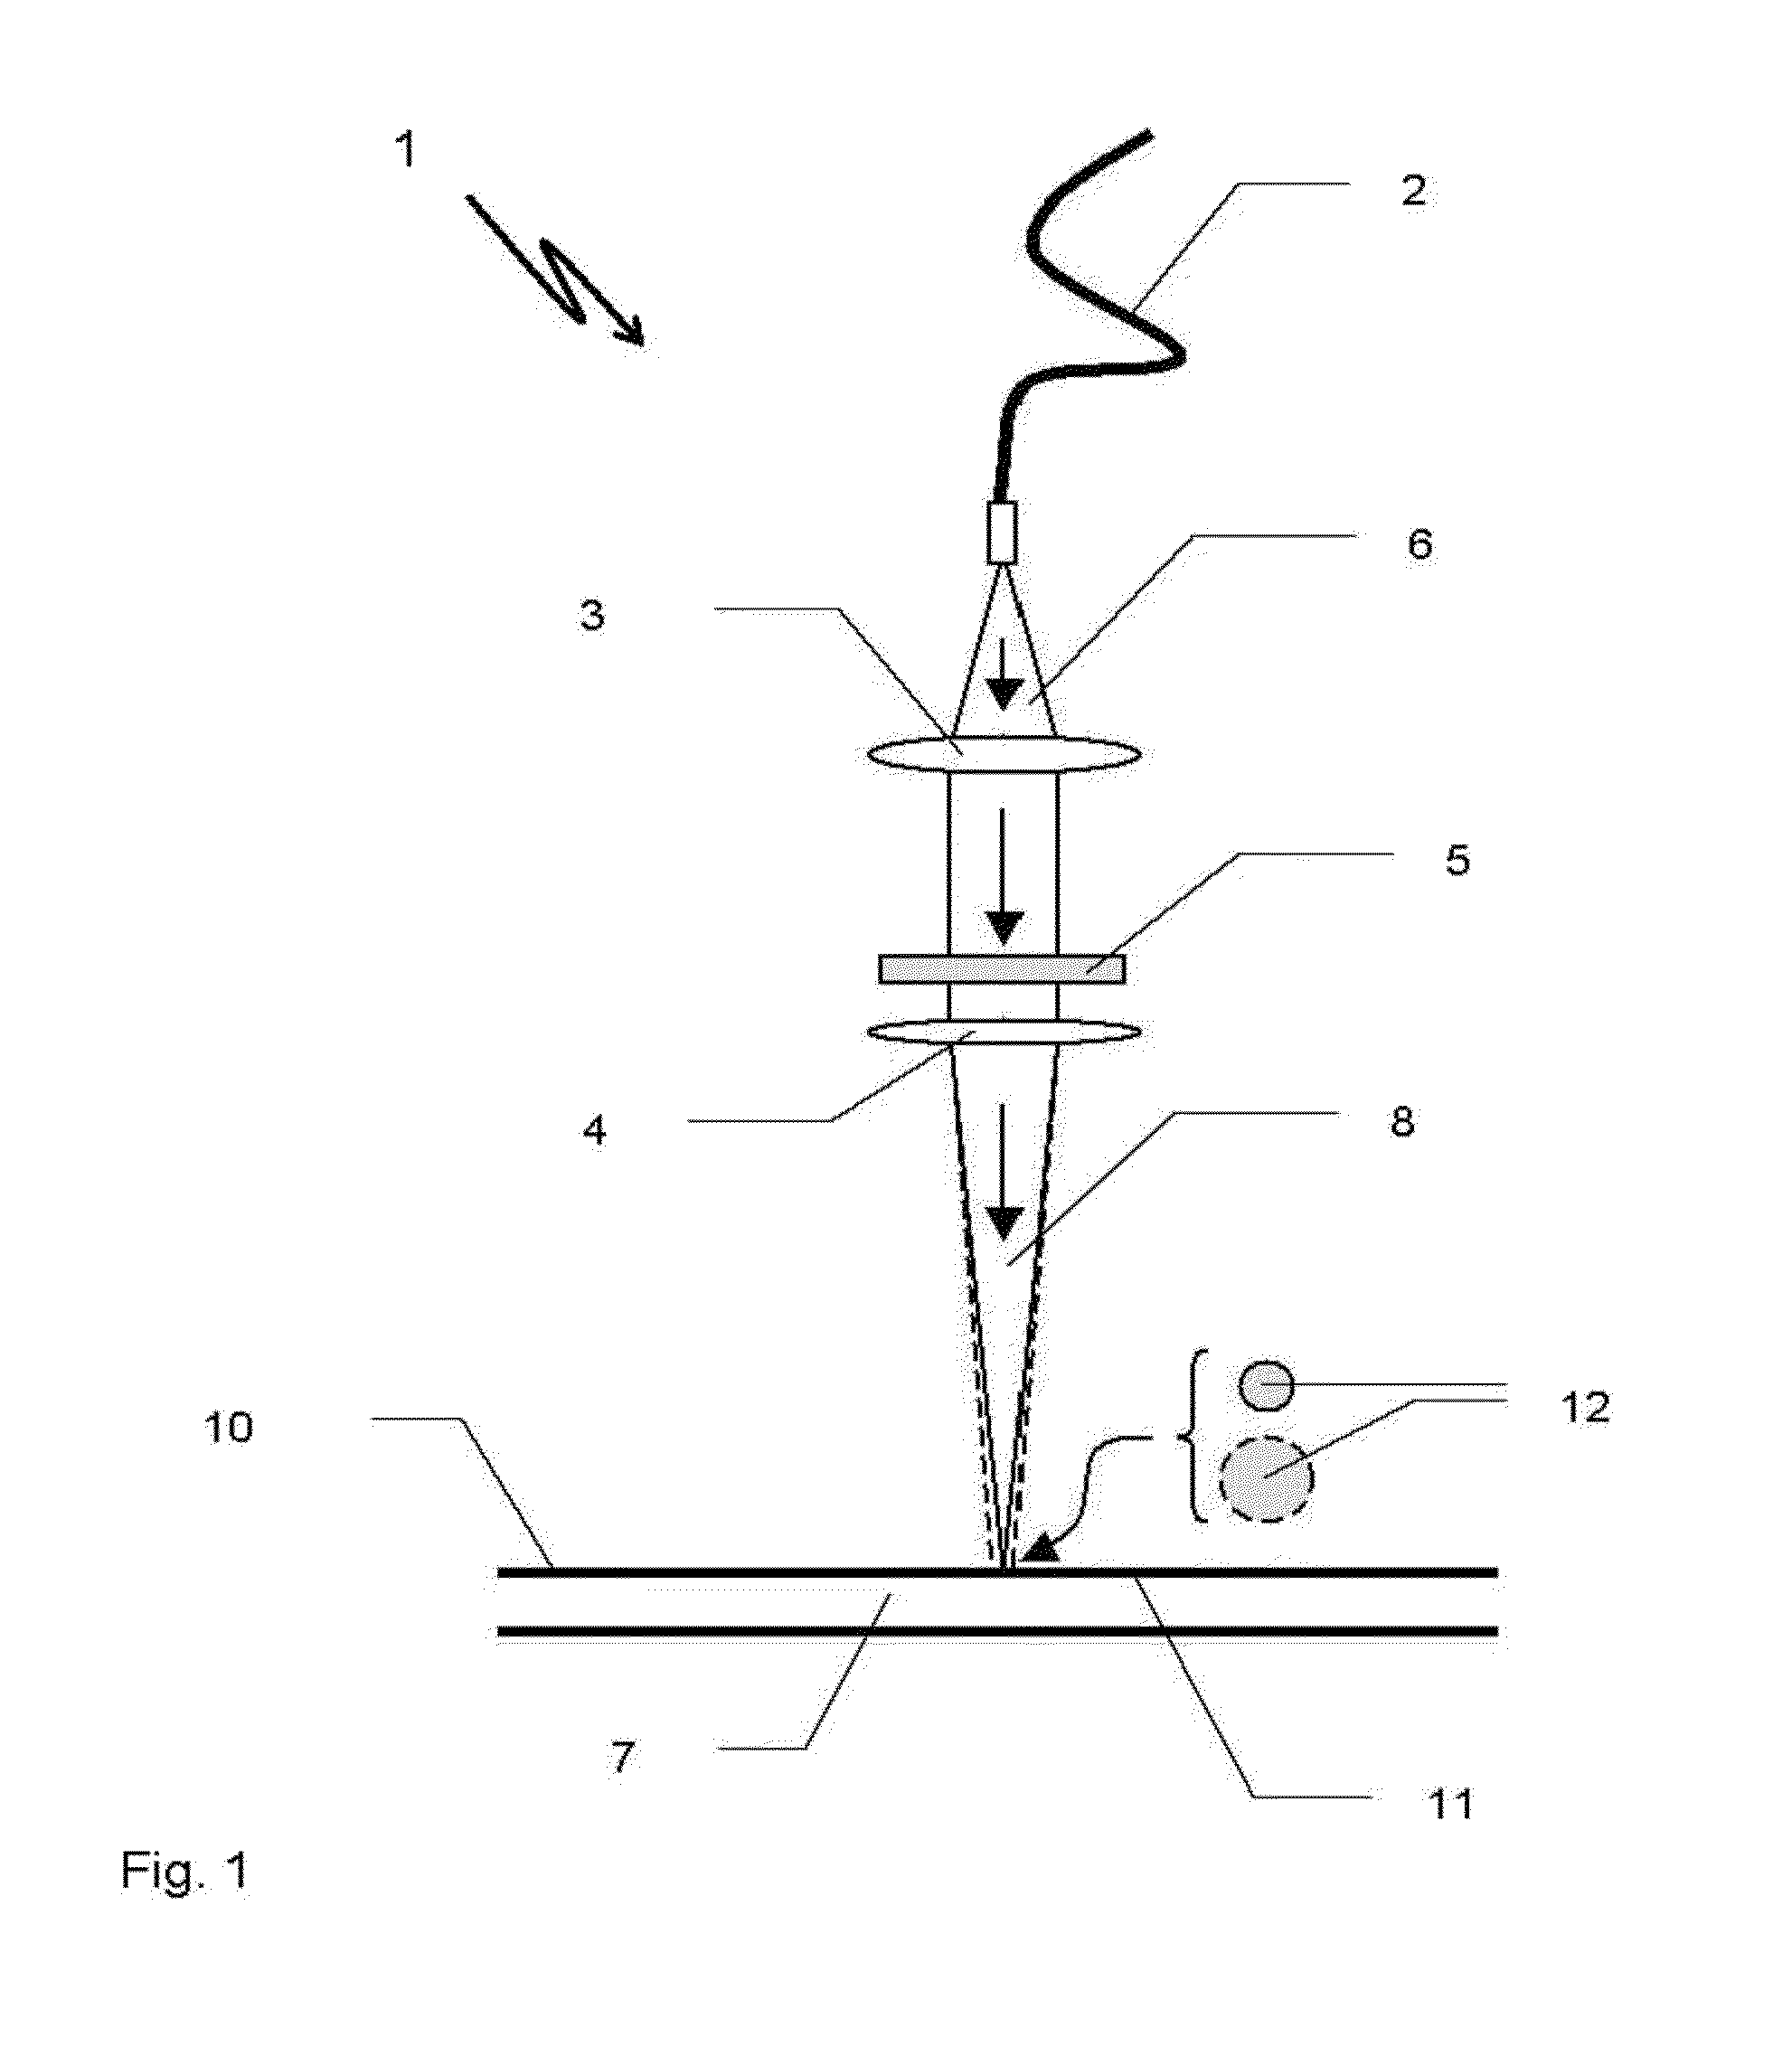 Process for the adjustment of a laser light spot for the laser processing of work pieces and a laser device for the performance of the process